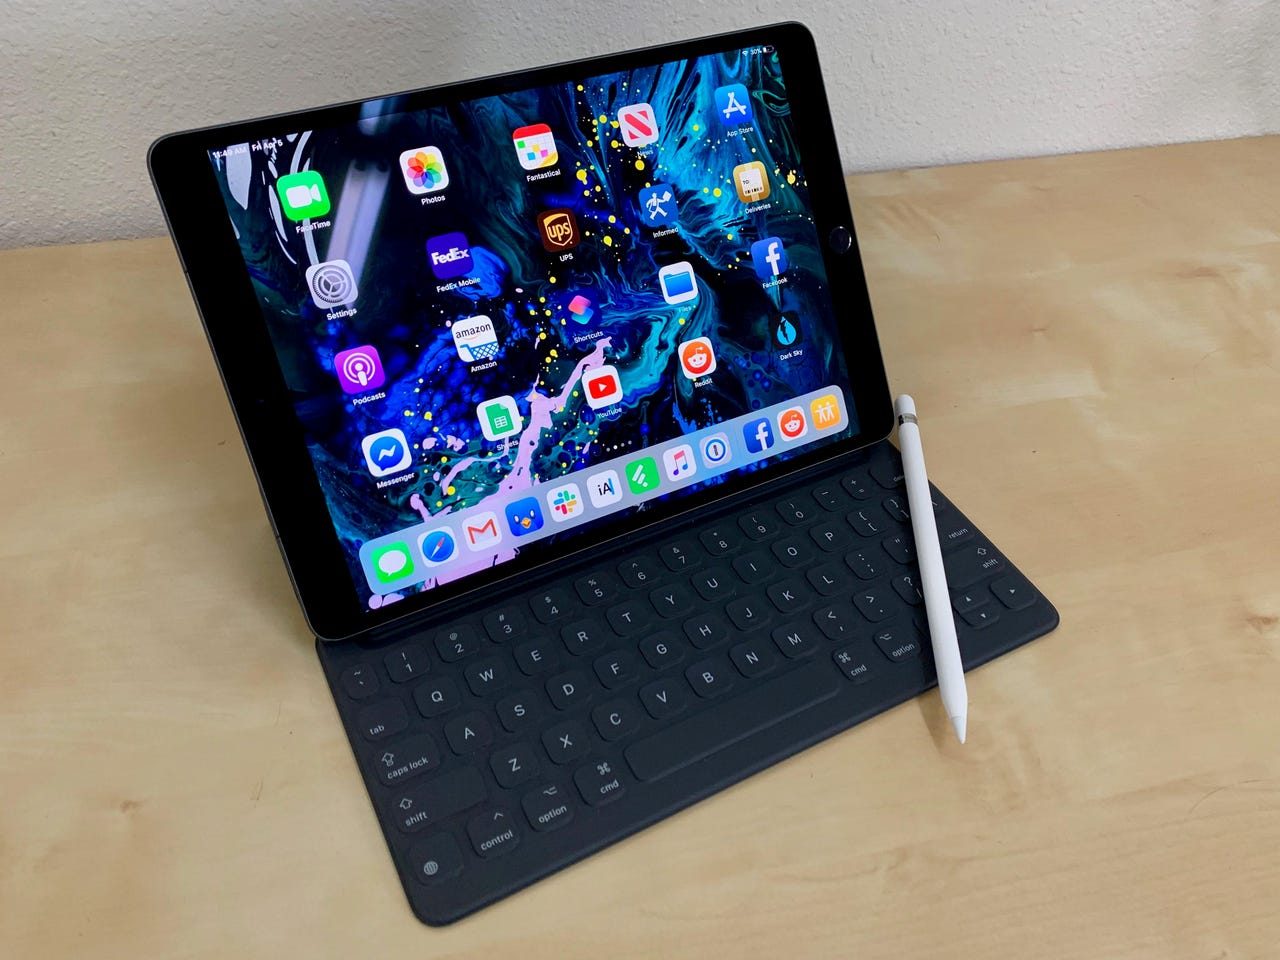 iPad Air (2019) review: Apple's newest tablet combines